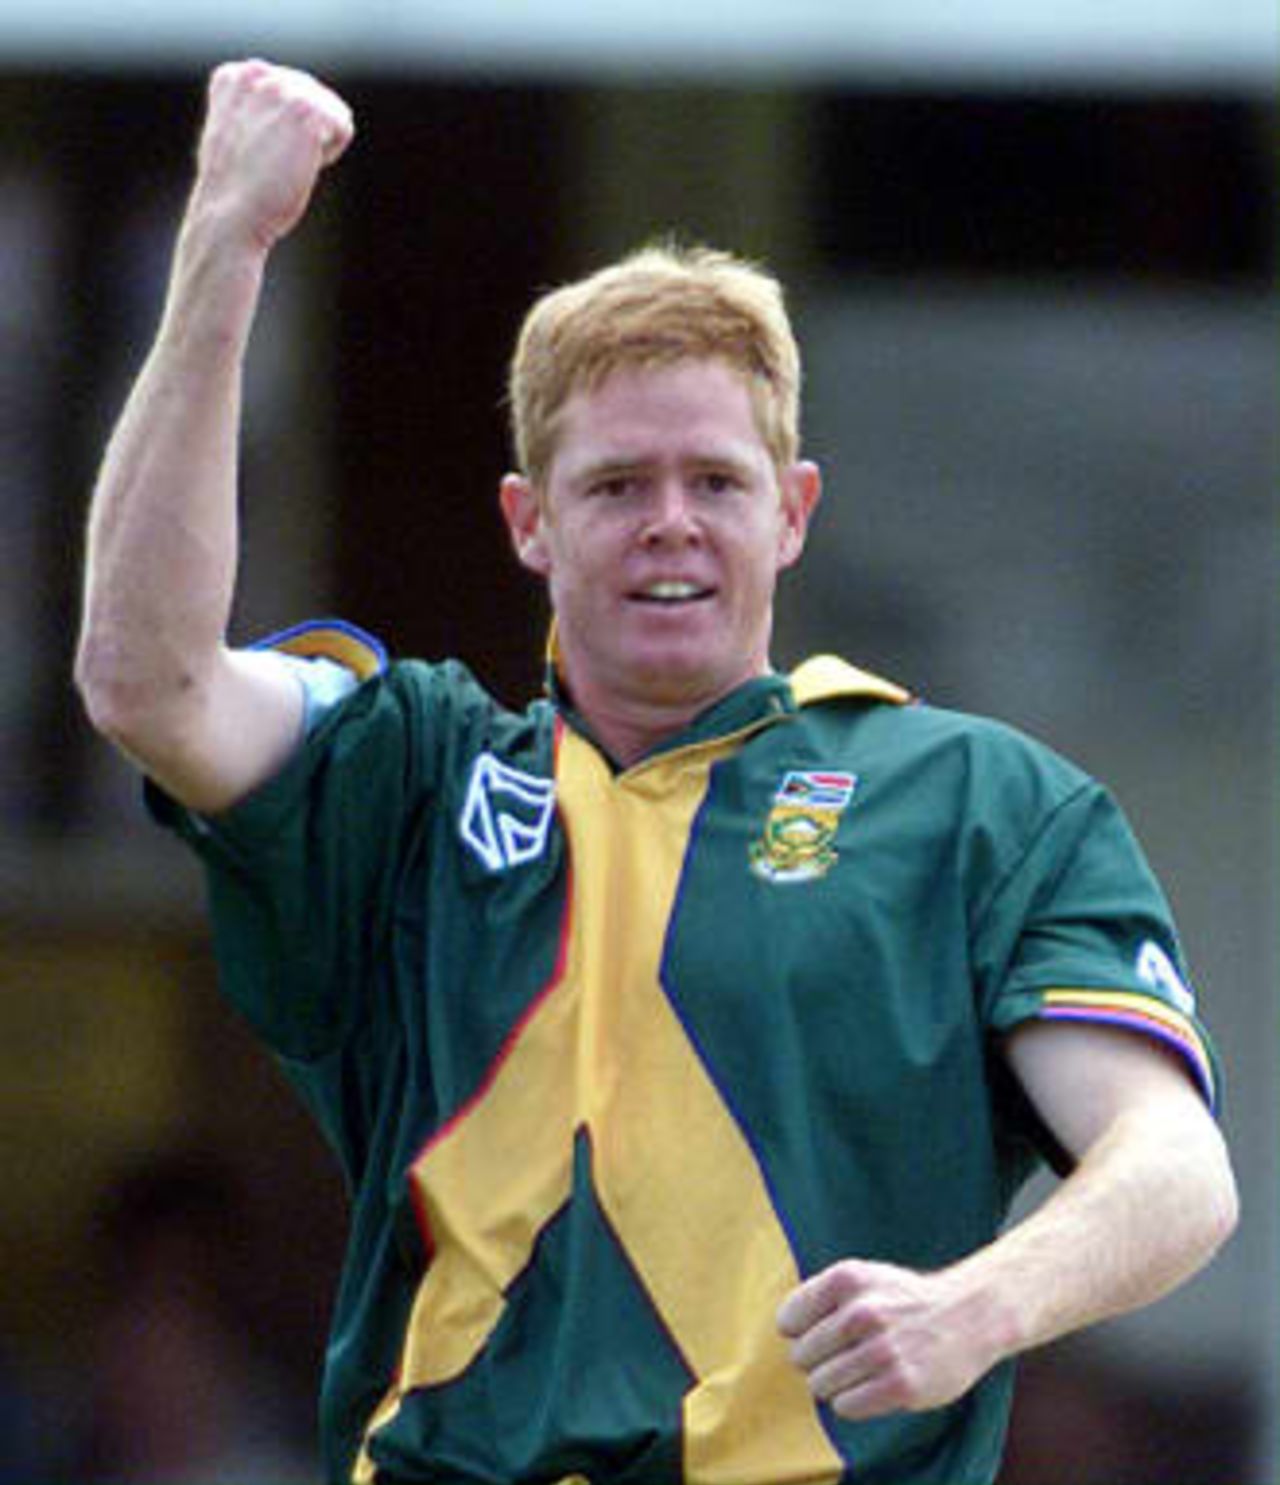 South African Shaun Pollock celebrates the end of the Australian innings with Pollock taking 5 for 36 runs 17 June 99, during their semi-final match in the Cricket World Cup at Edgbaston, Birmingham.  The final will be at Lords 20 June